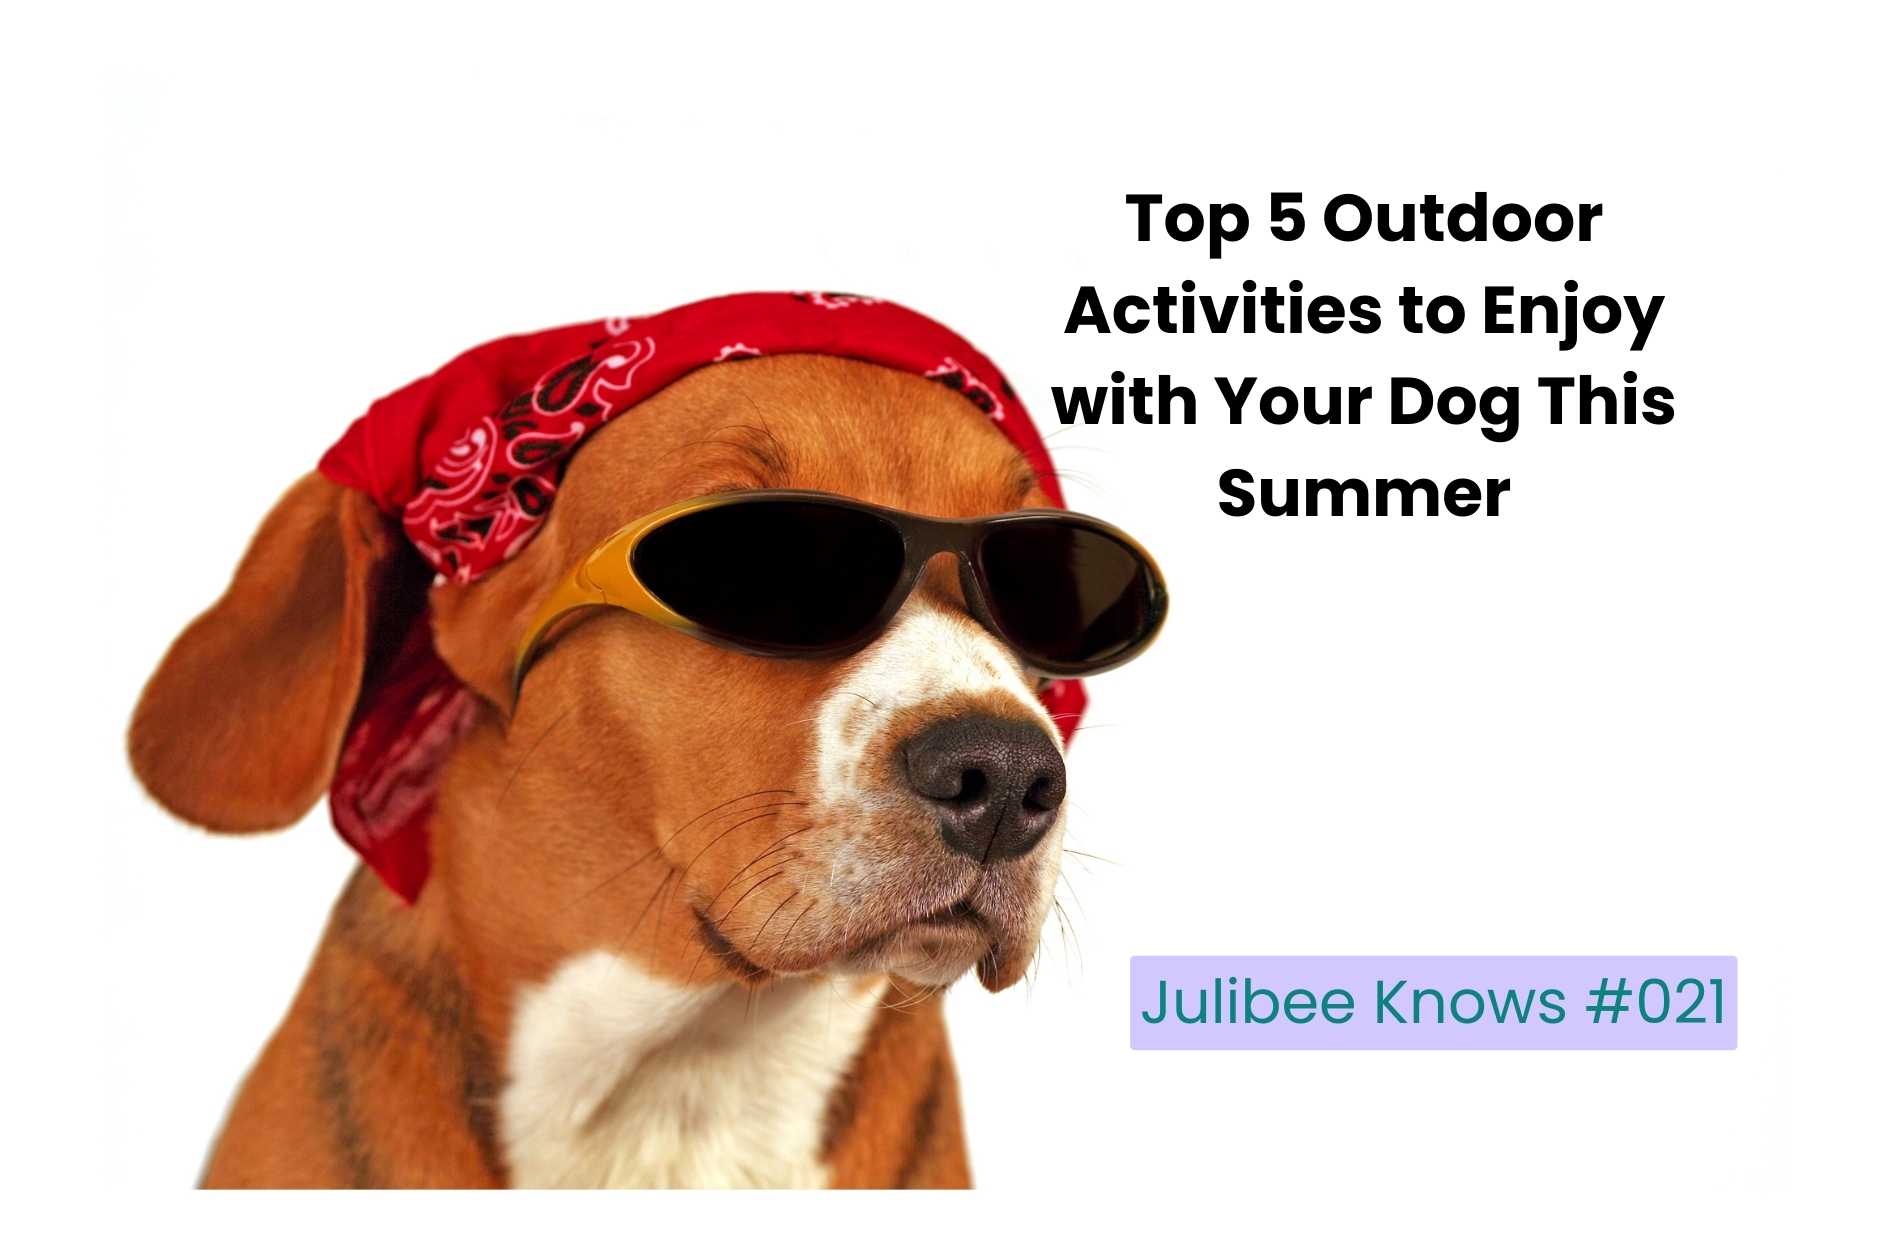 Top 5 Outdoor Activities to Enjoy with Your Dog This Summer - Julibee's